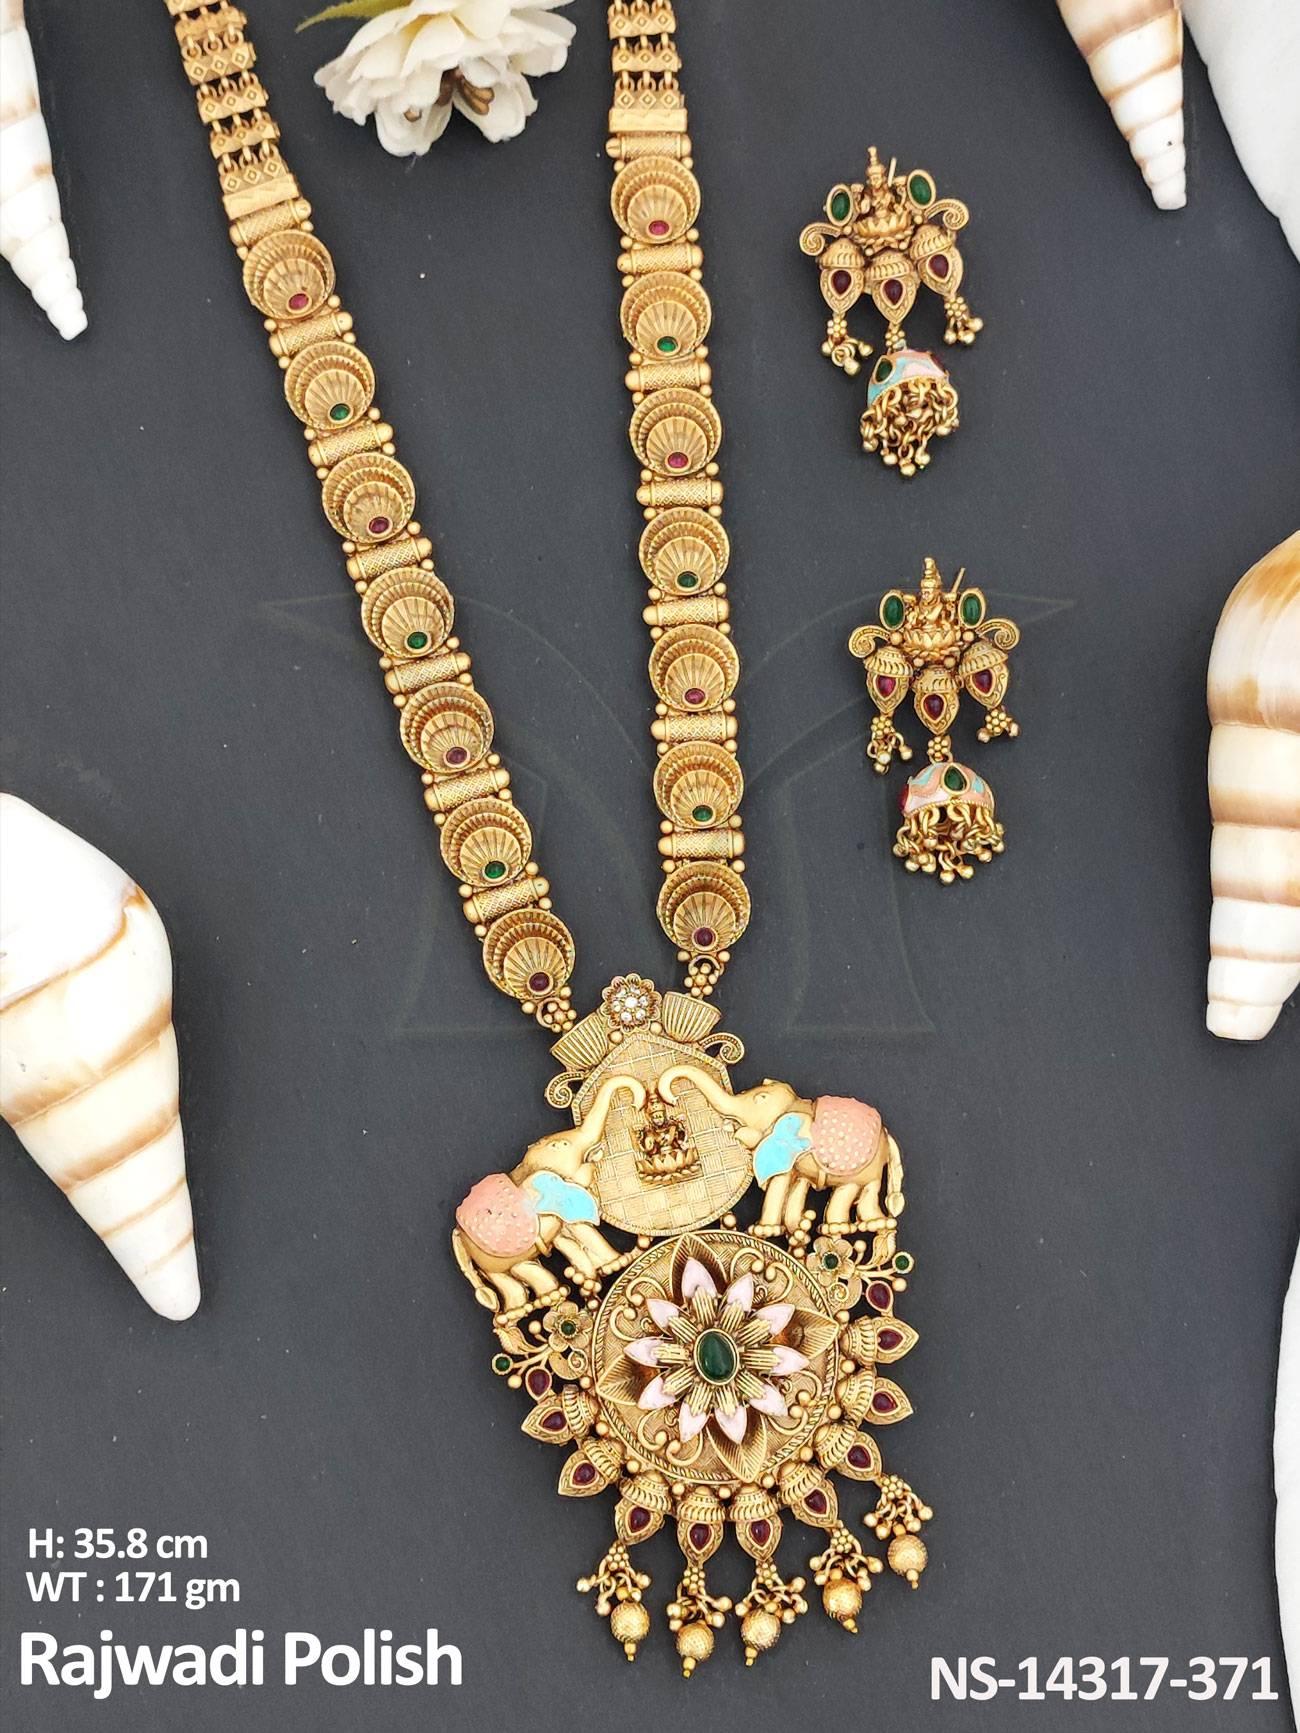 This designer antique necklace set features a Rajwadi polish and full stone embellishments, perfect for adding a touch of elegance to any party outfit.